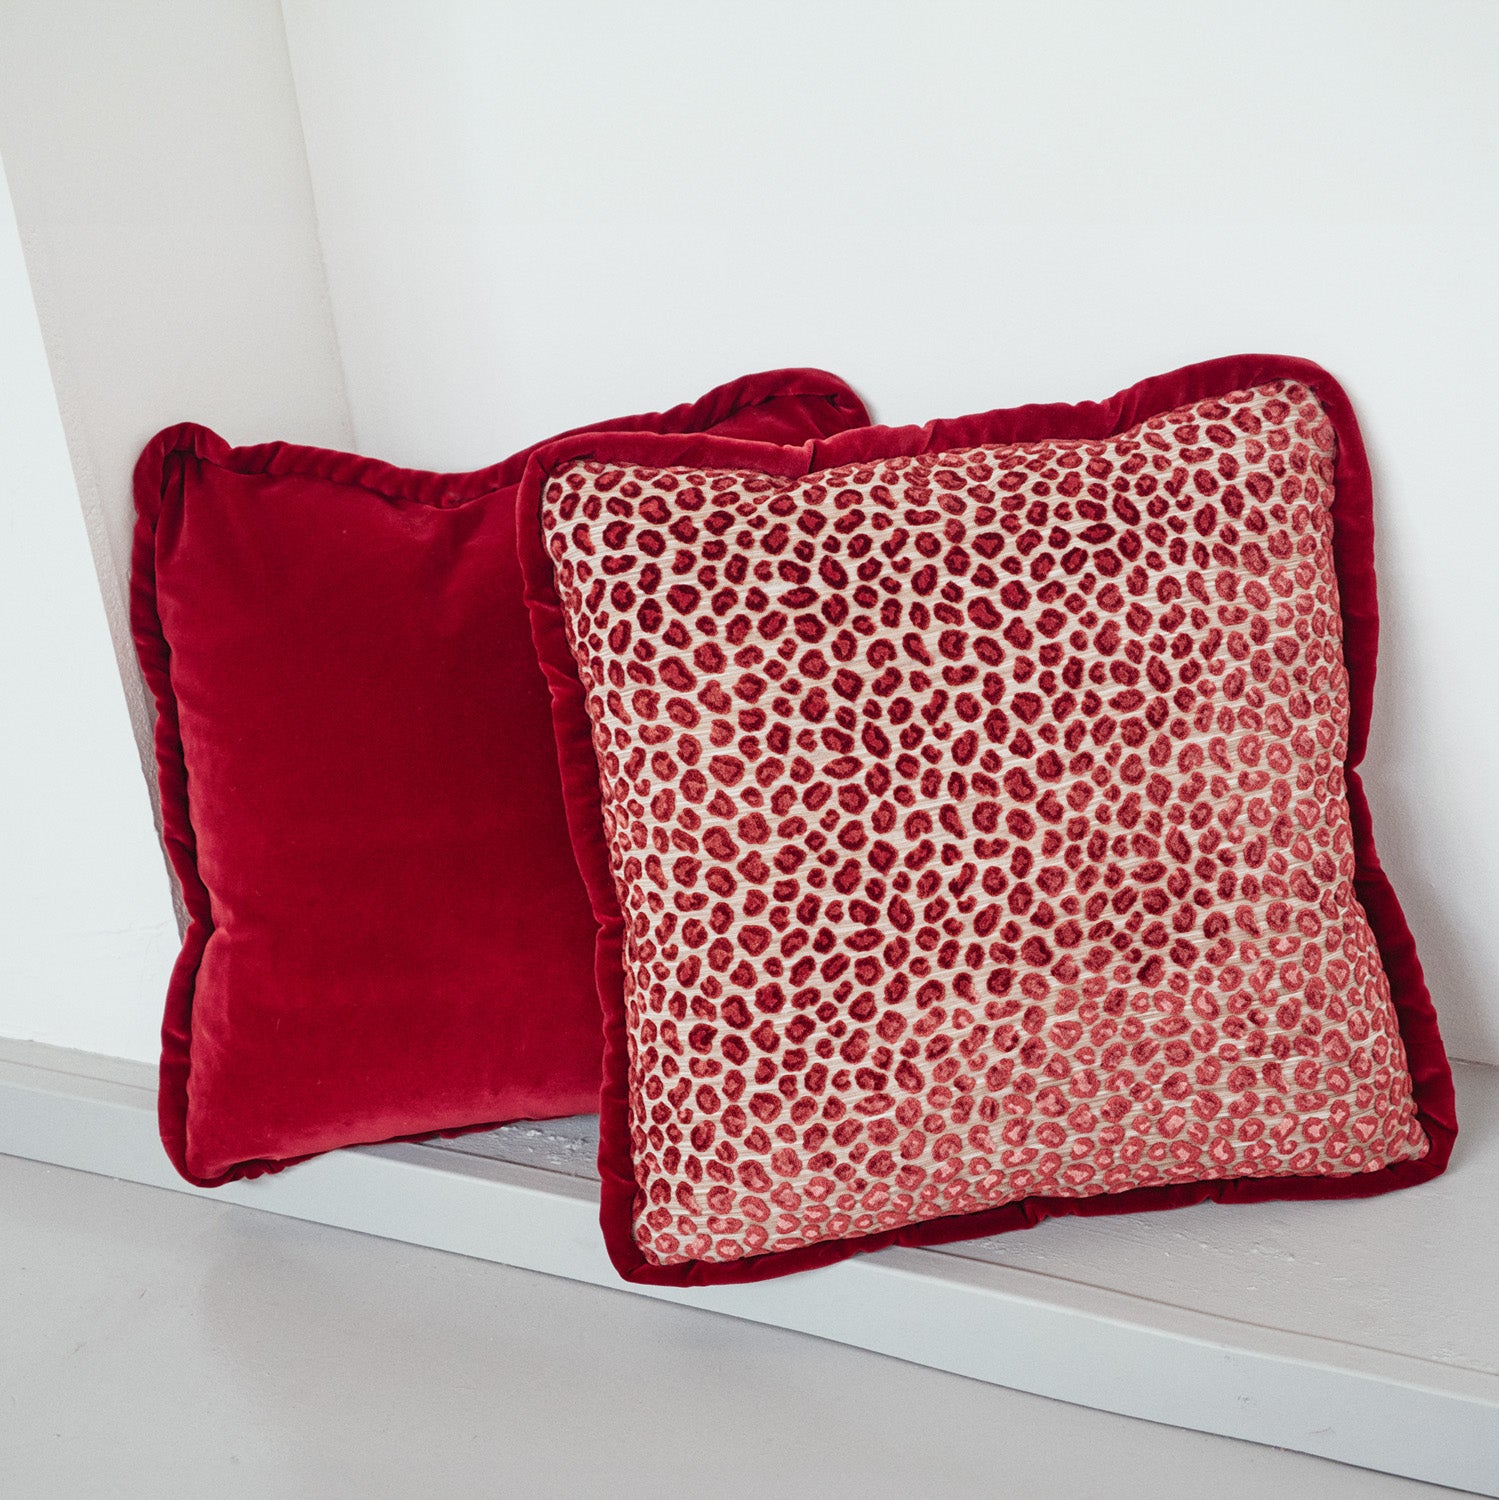 Reversible Cushion - Glam Leopard & Red Couture